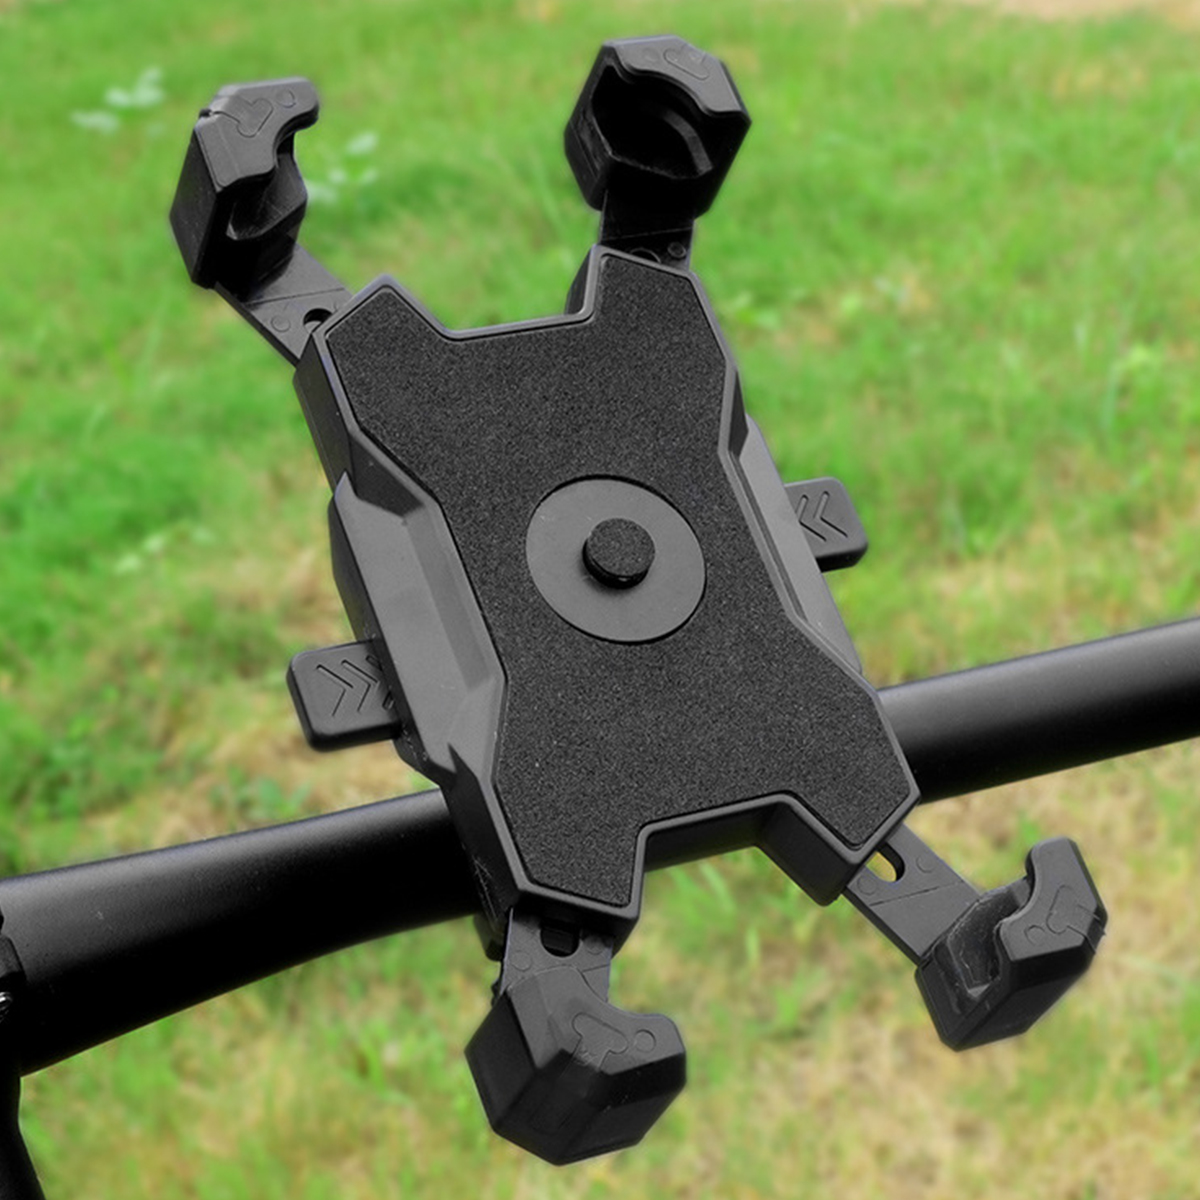 1pc Practical Durable Exquisite Phone Stand Bike Tool Phone Holder Storage Rack for Motorbike Bicycle Bike